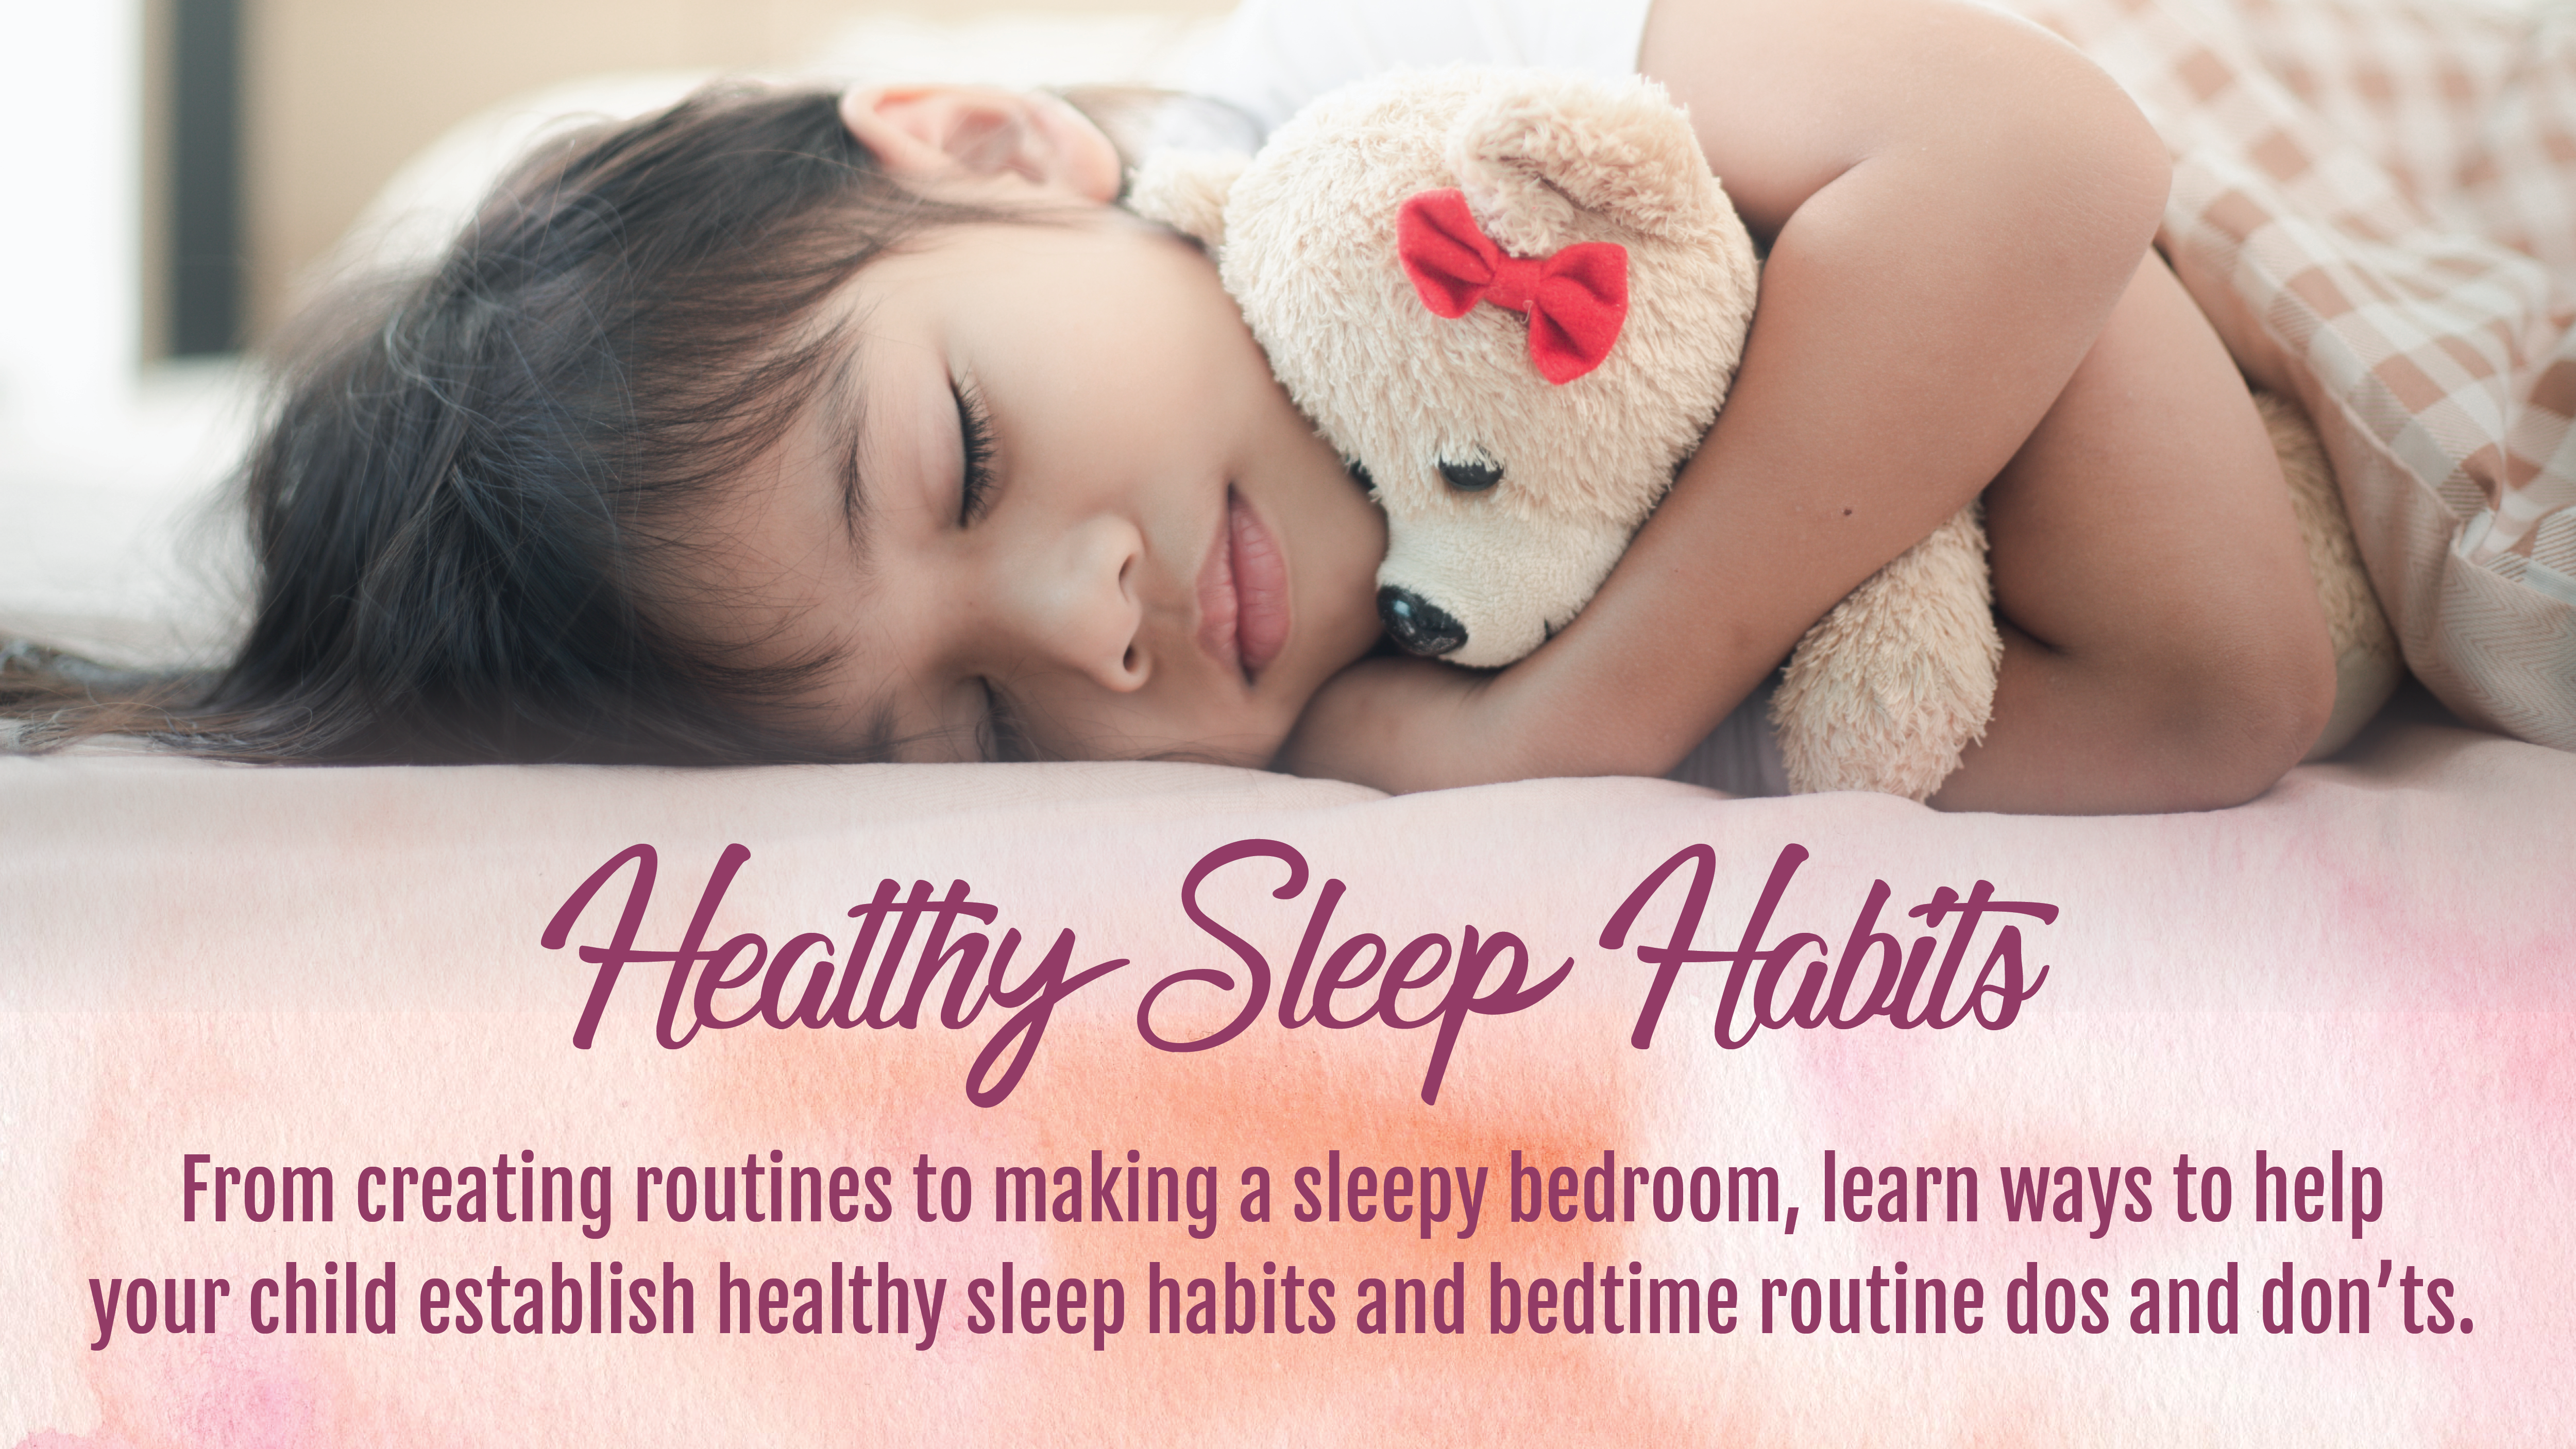 Healthy Sleep Habits --- From creating routines to making a sleepy bedroom, learn ways to help your child establish healthy sleep habits and bedtime routine dos and don'ts.